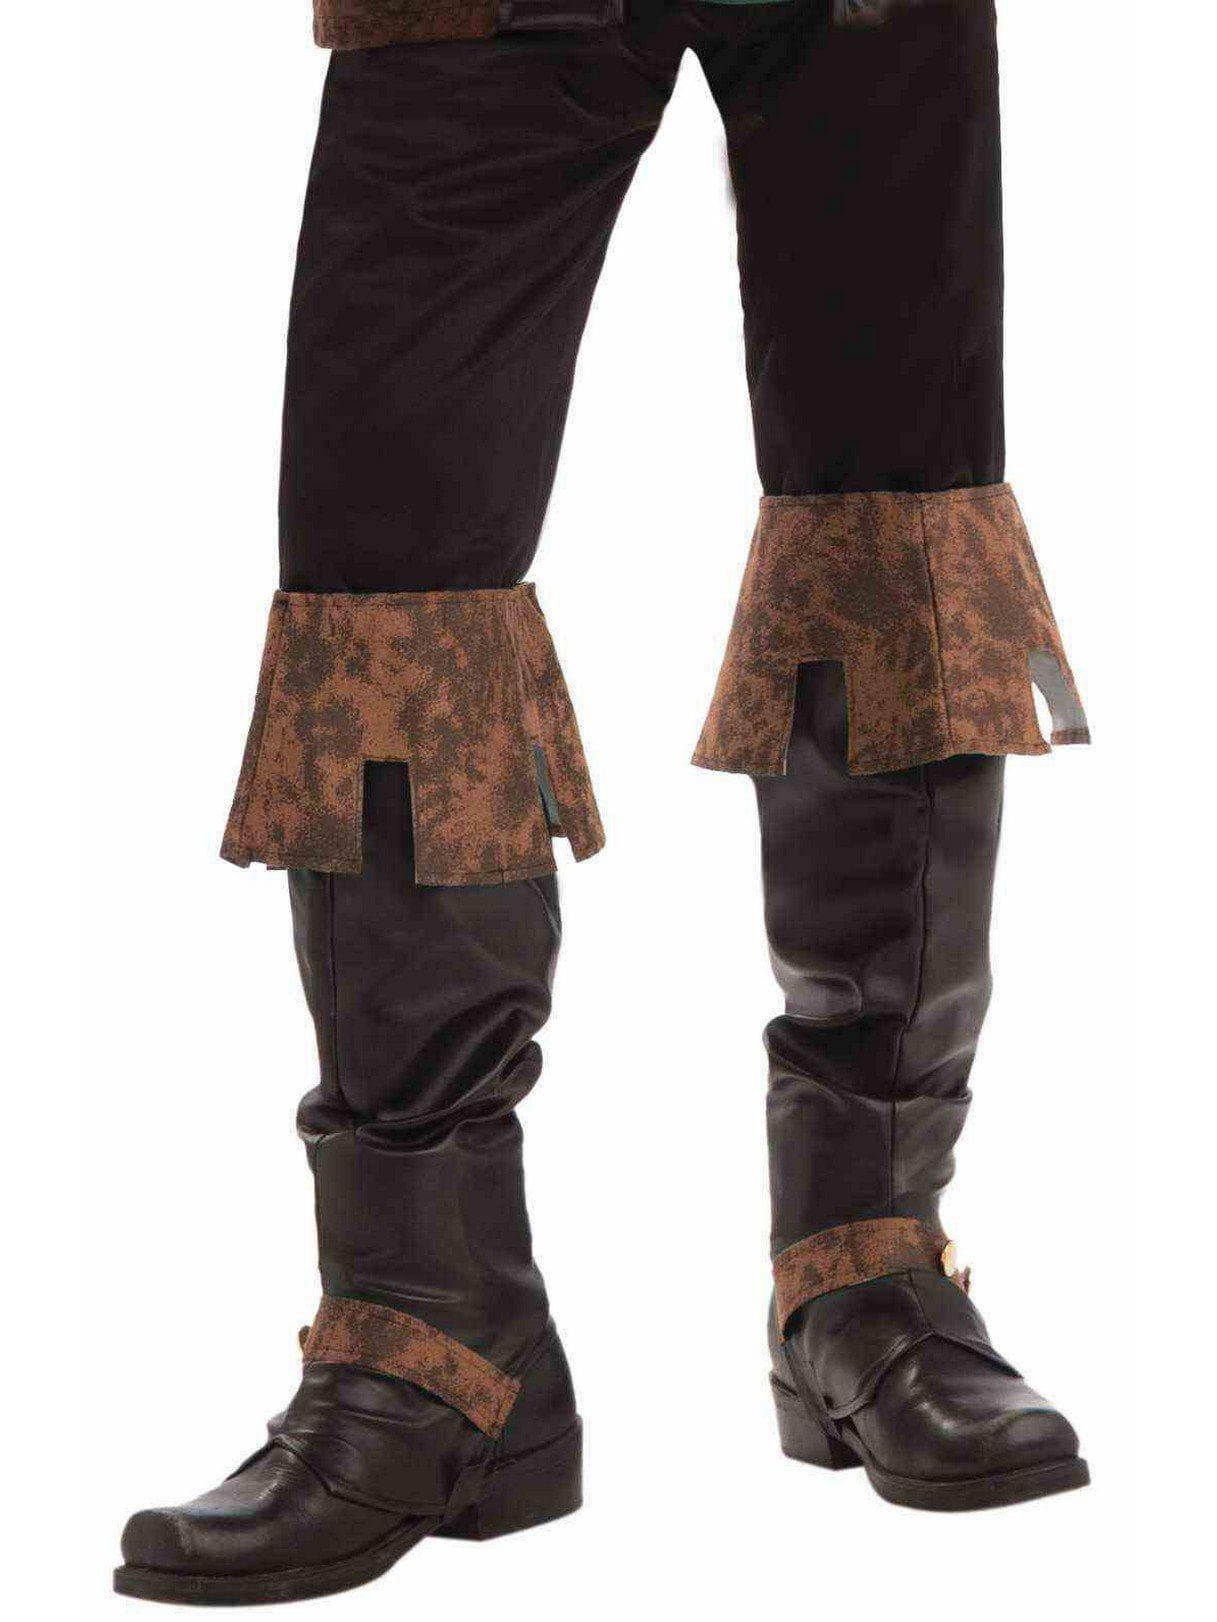 Adult Brown Medieval Boot Tops - costumes.com